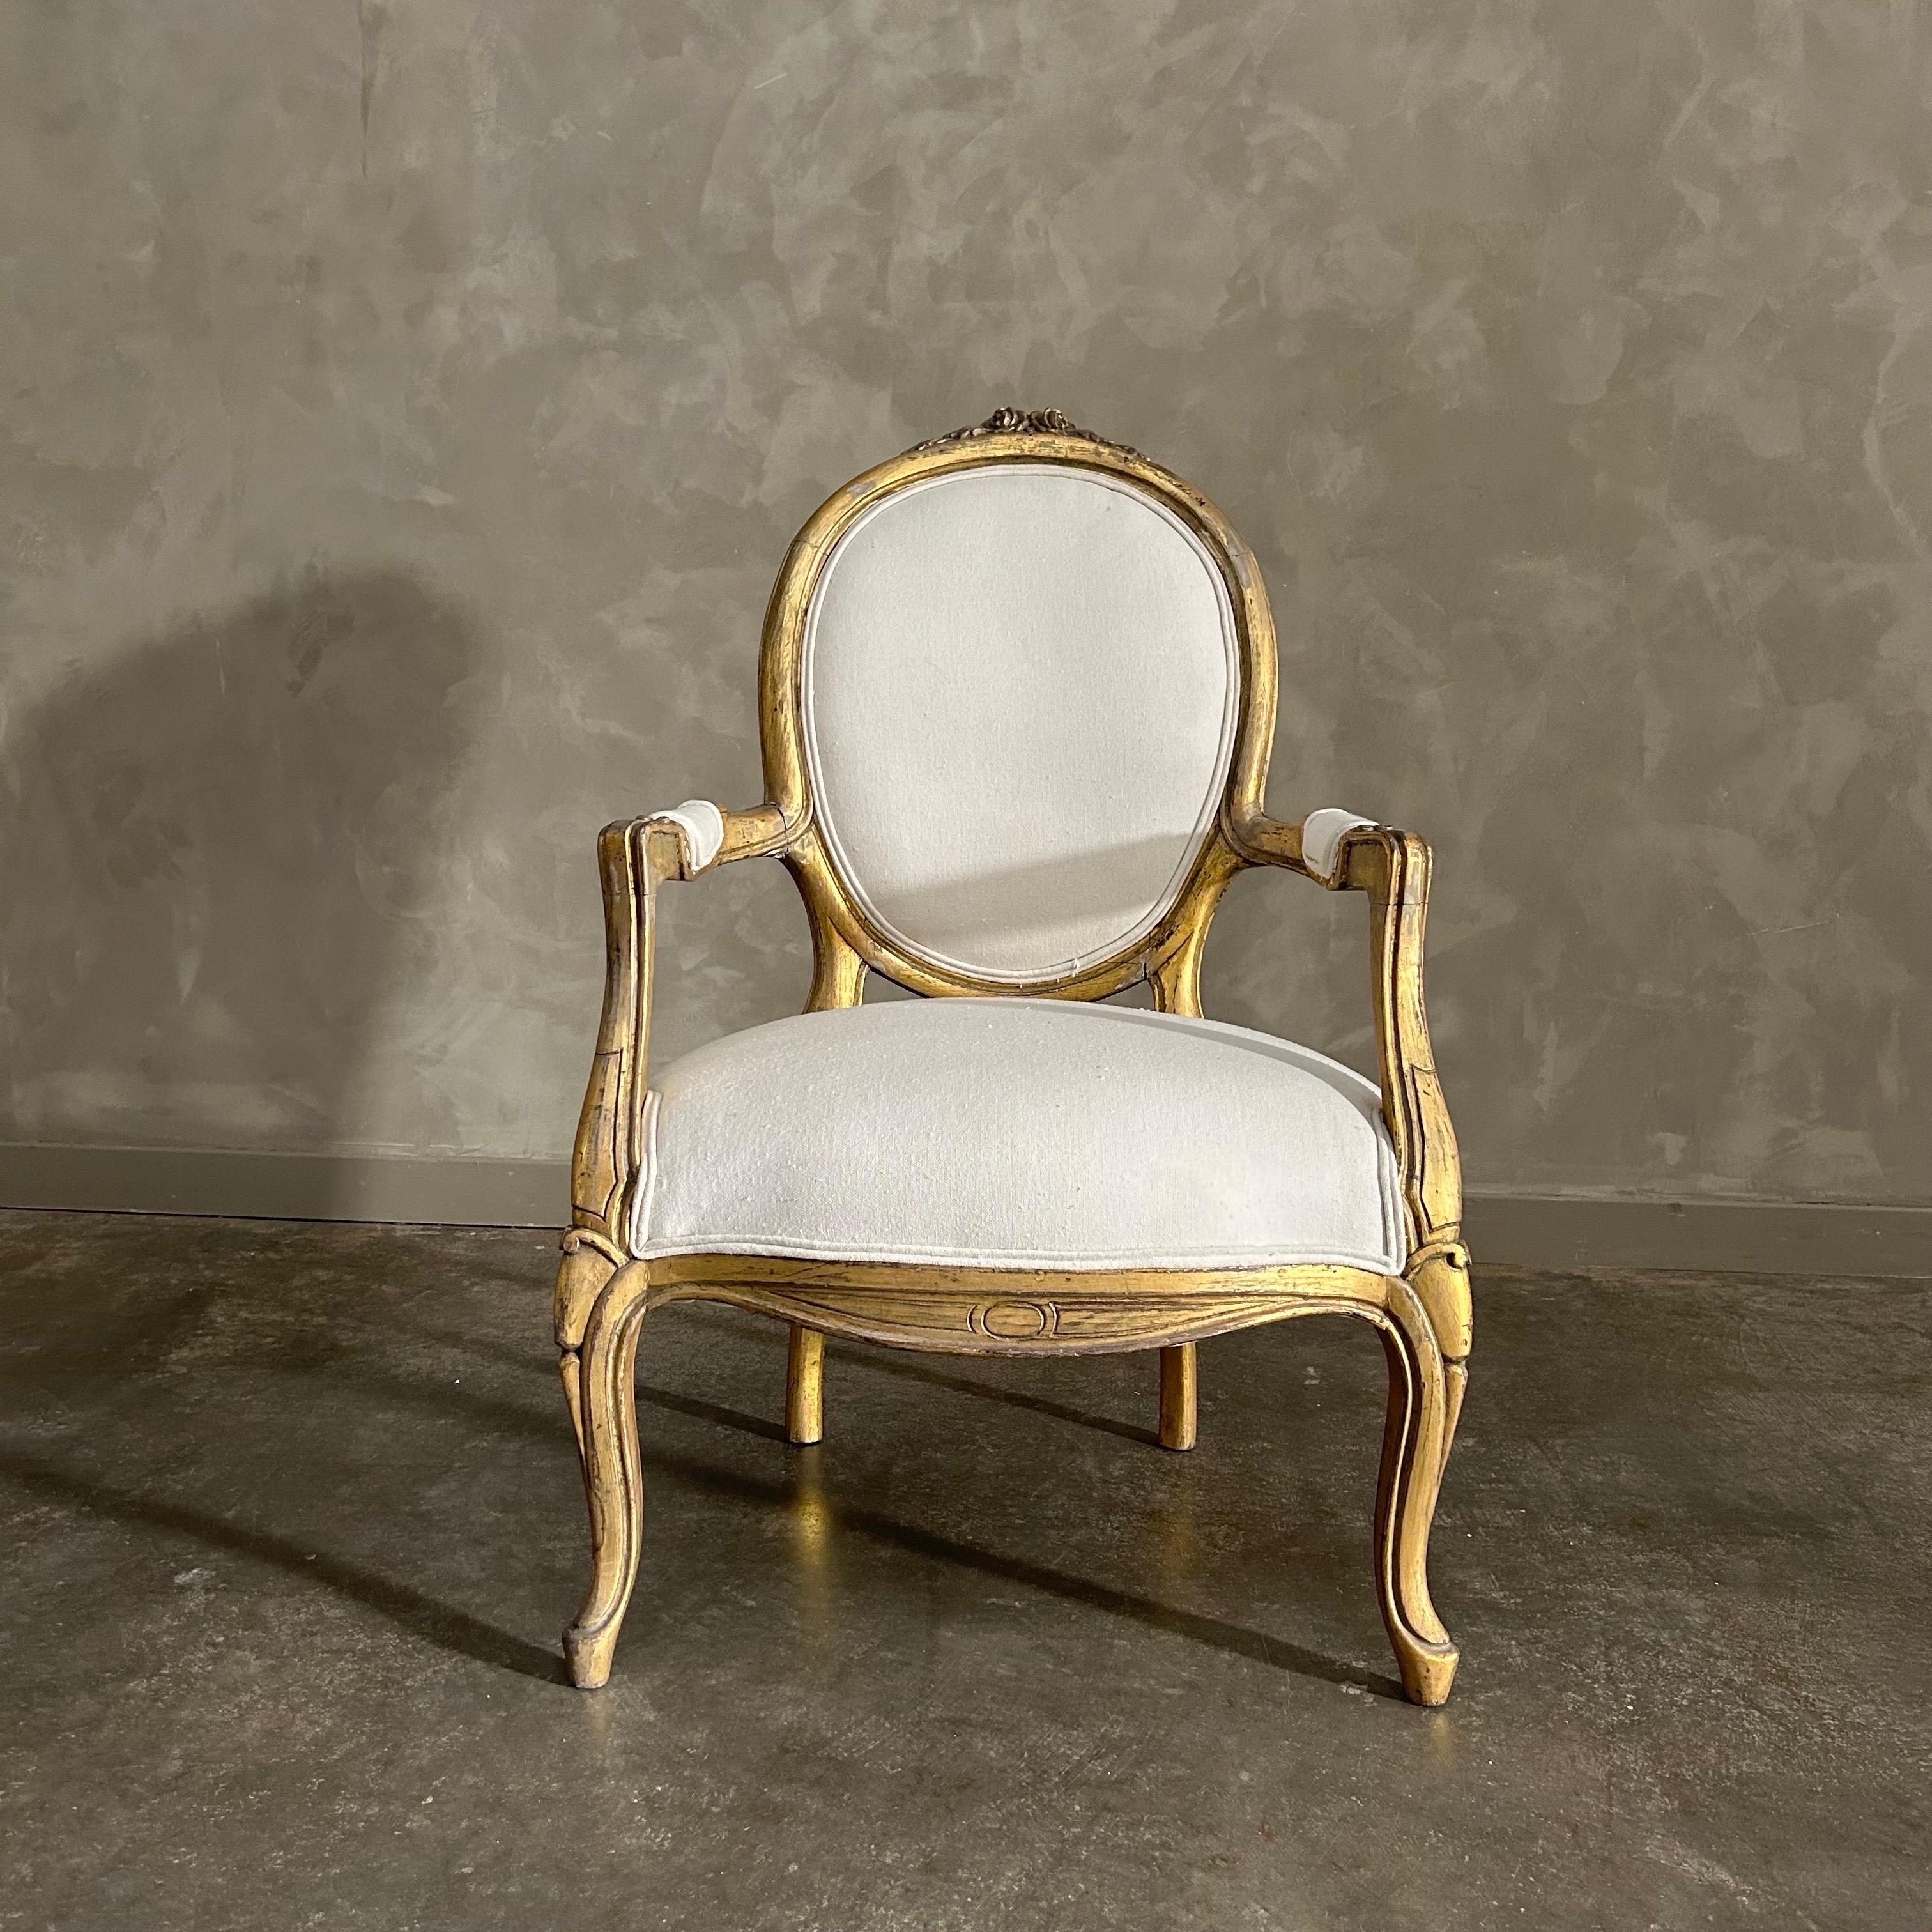 Vintage gilt wood open arm chair. This vintage chair has the original finish, which is a weathered patina gilt wood. We have reupholstered them in a linen with burlap back.  Finished each by hand for a true antique look. Solid and sturdy, petite,